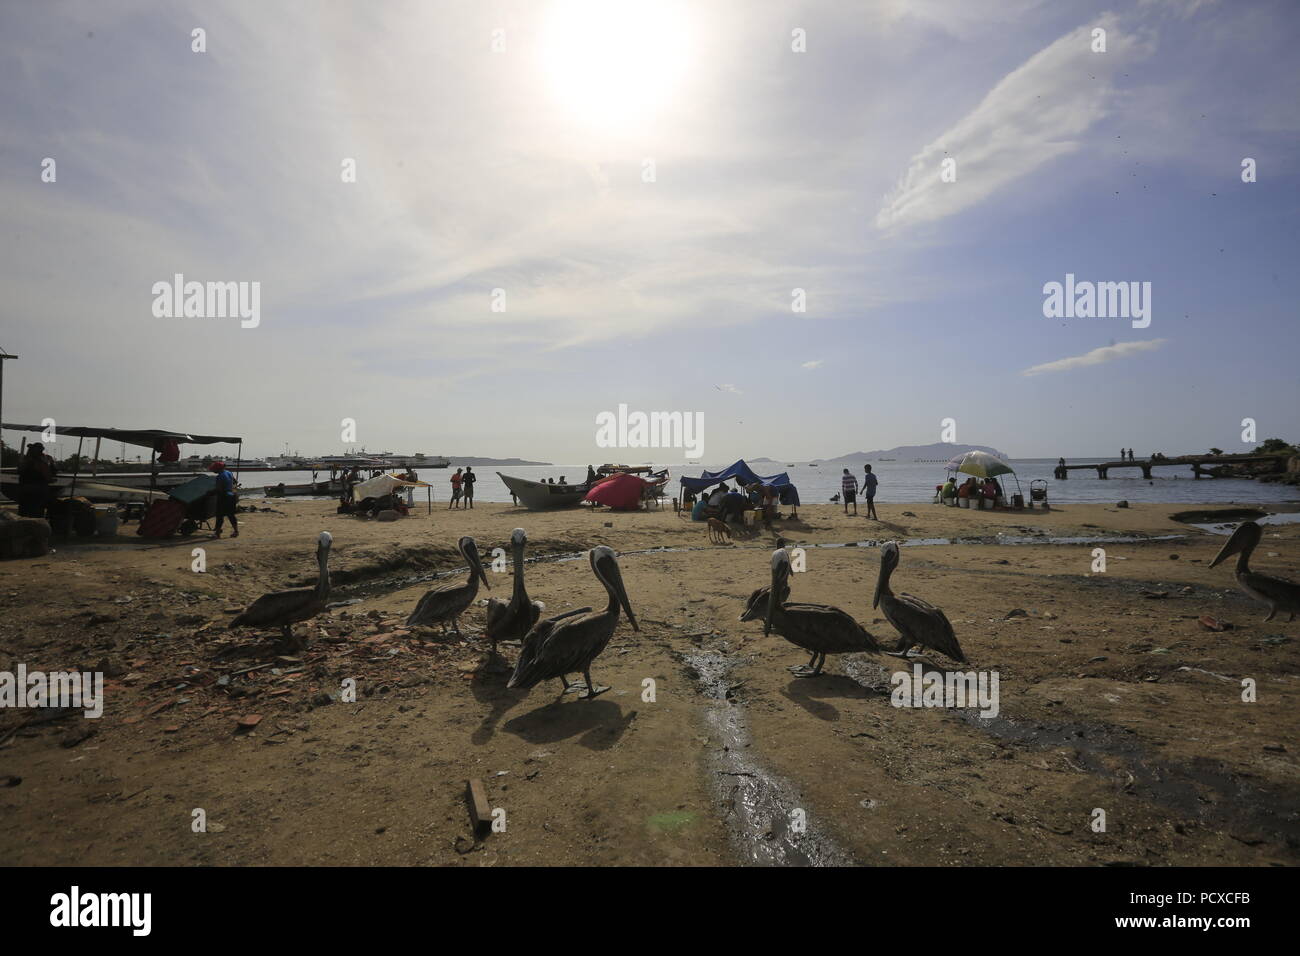 Puerto La Cruz, Anzoategui, Venezuela. 3rd Aug, 2018. August 03, 2018. Pelicans (Pelecanus) are a genus of pelecaniformes aquatic birds belonging to the monotypic family Pelecanidae. They are characterized by their long beak with a large gular sac that they use to capture their prey and drain the collected water before swallowing them. These photos were made in the popular Los Cocos market. In Puerto la Cruz, Anzoategui state. Venezuela. Photo: Juan Carlos Hernandez Credit: Juan Carlos Hernandez/ZUMA Wire/Alamy Live News Stock Photo